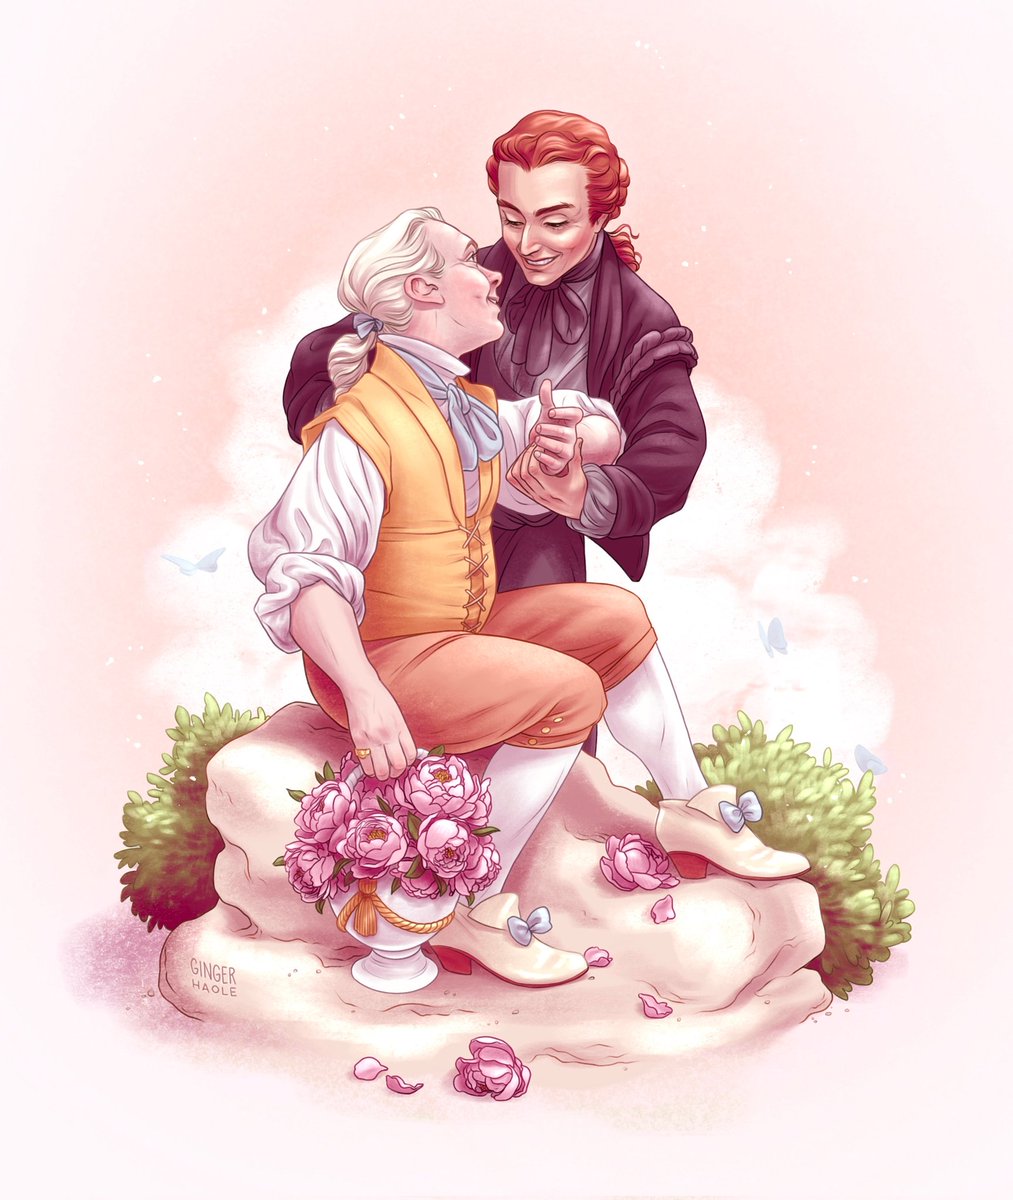 Pink peonies and discreetly stolen pecks on the cheeks; très romantique! #GoodOmens #Crowley #Aziraphale